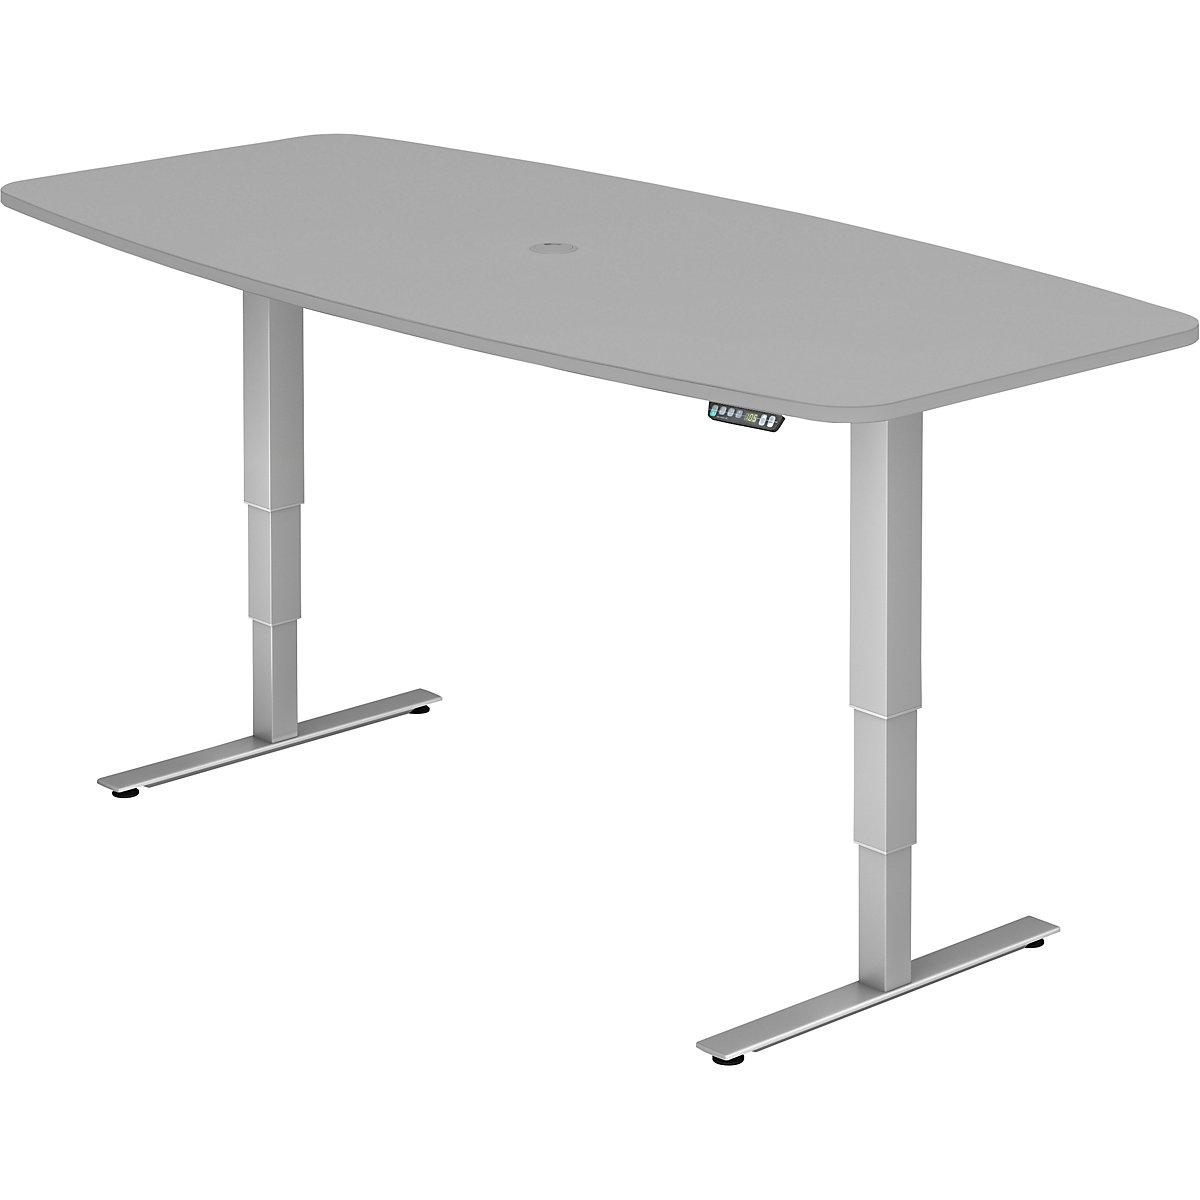 Conference table, WxD 2200 x 1030 mm